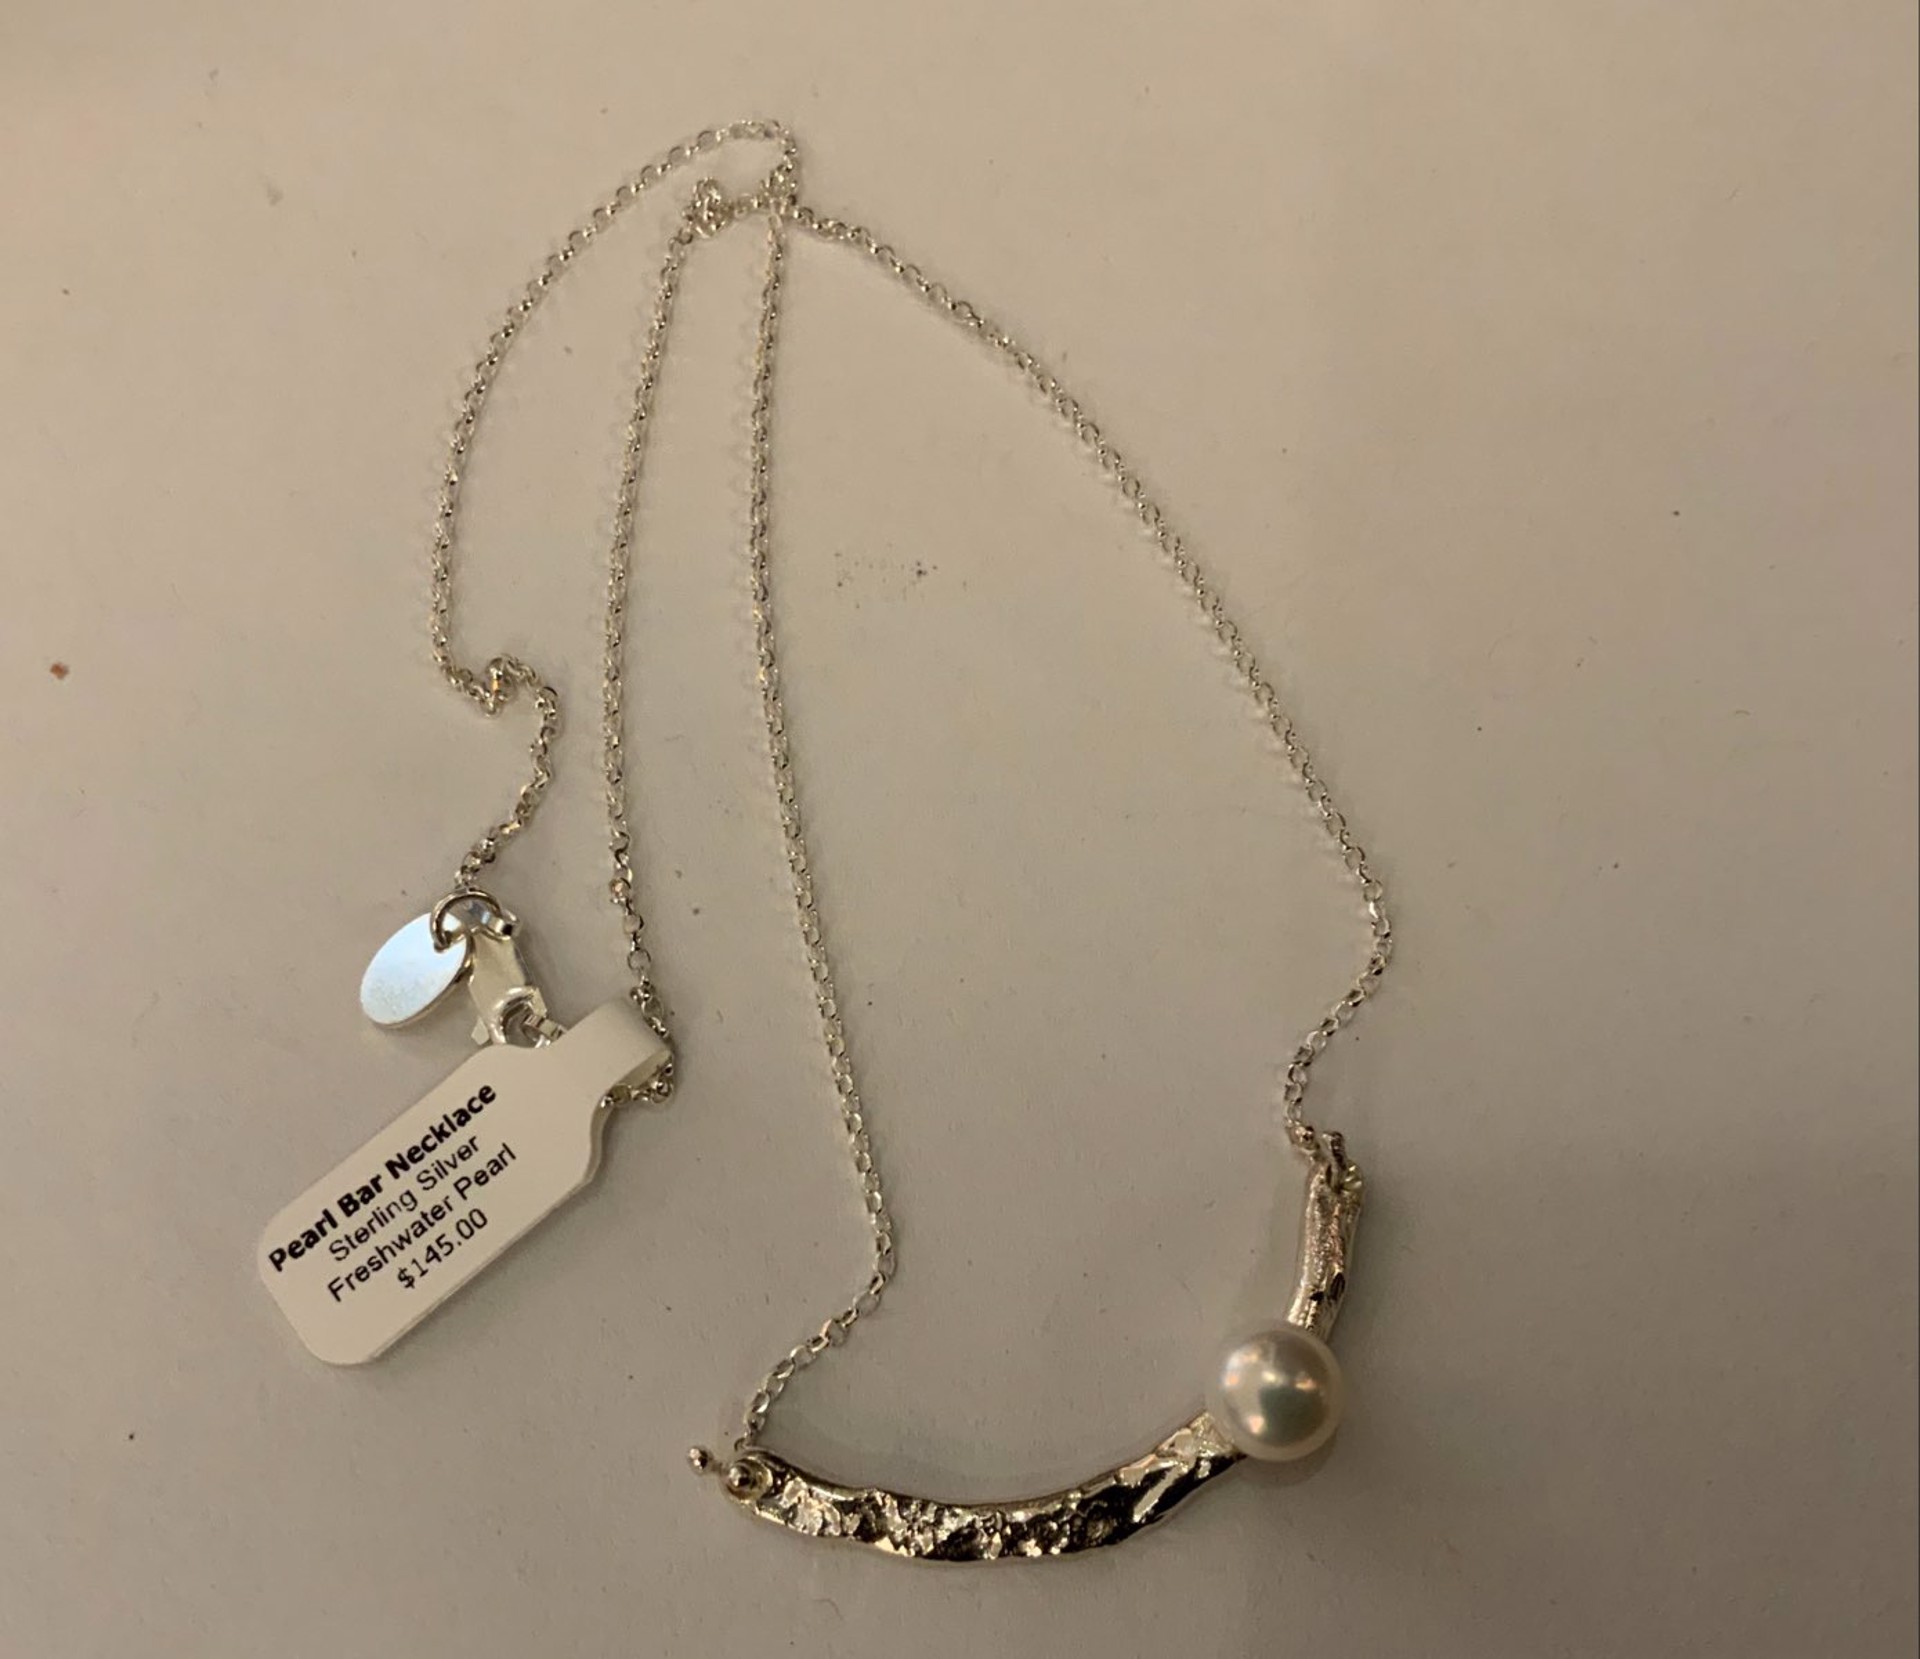 Pearl Bar Sterling Silver Necklace by Kristen Baird